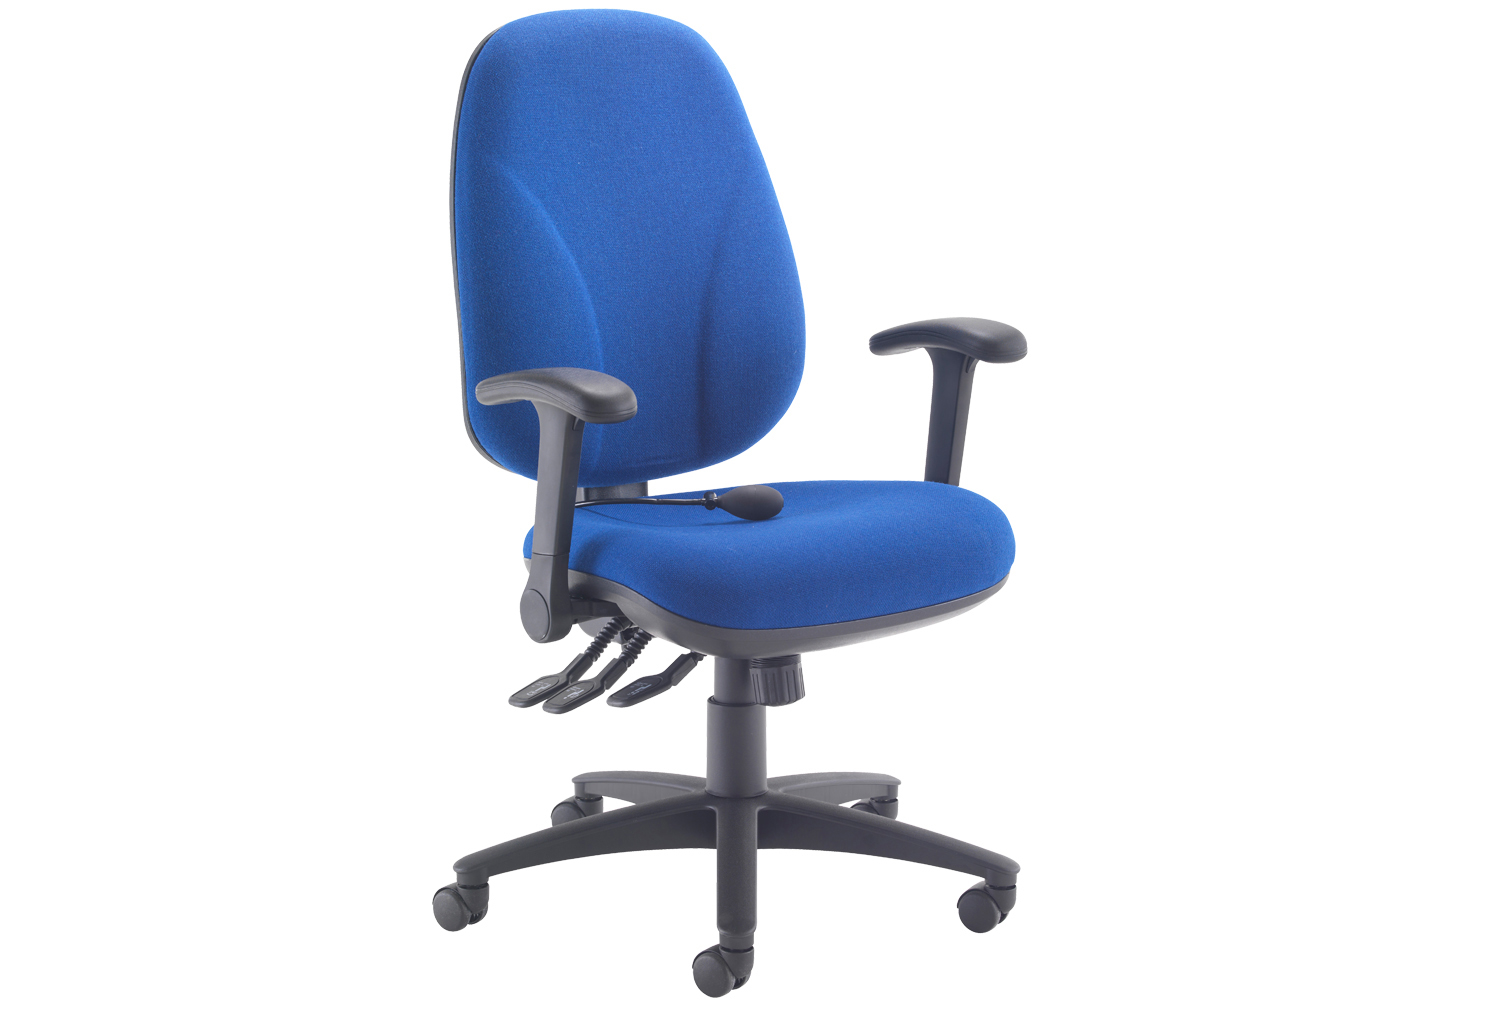 Orchid Deluxe Lumbar Pump Ergonomic Operator Office Chair With Folding Arms, Blue, Express Delivery